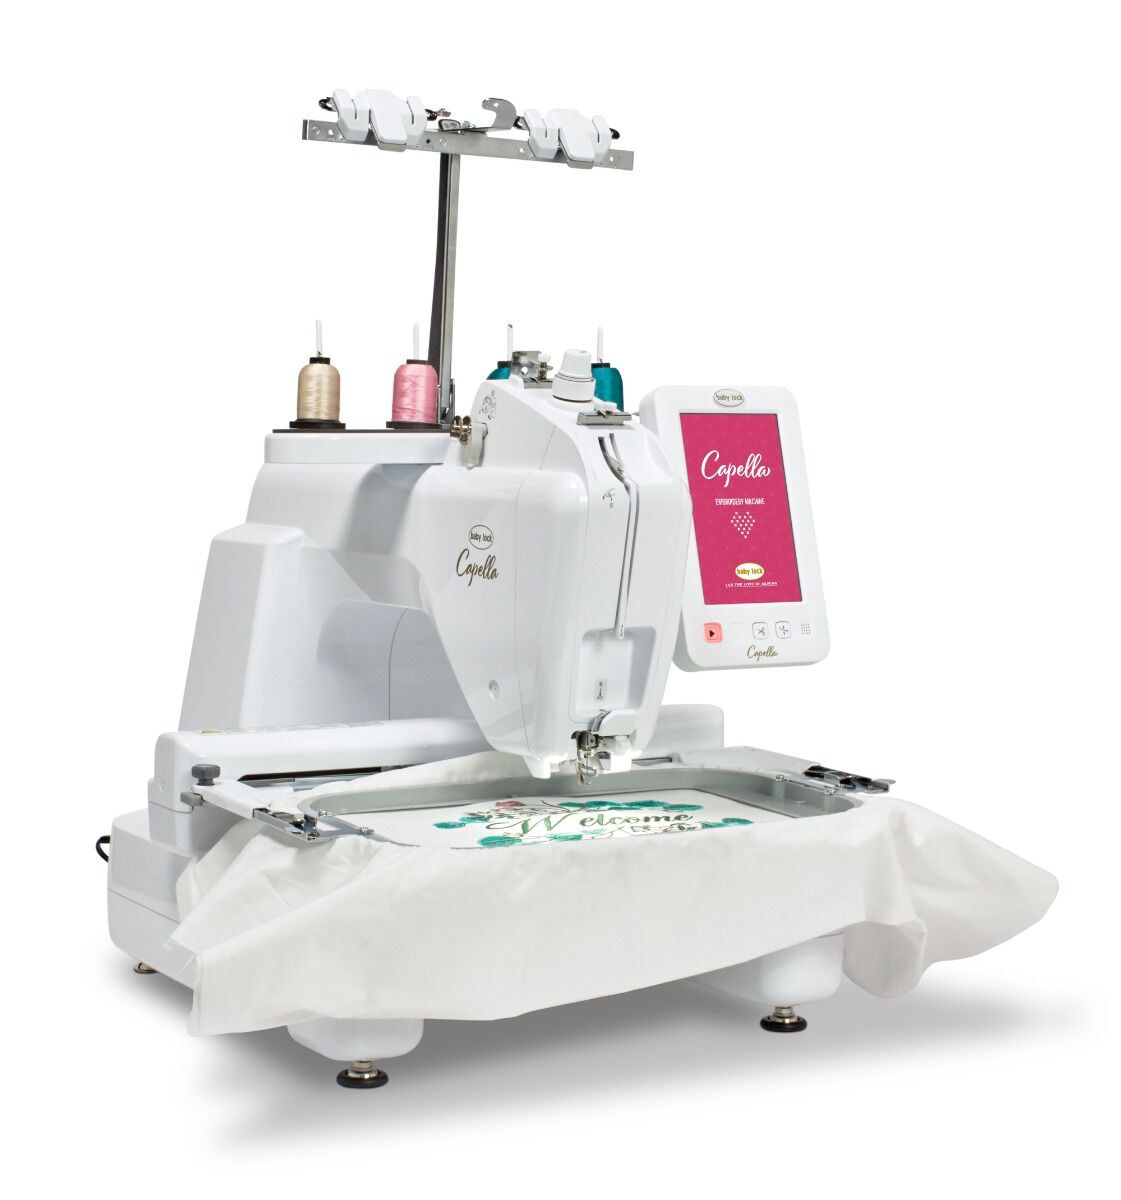 Baby Lock Capella Single-Needle Embroidery Machine - with FREE Gift (F100TS1-XXX)